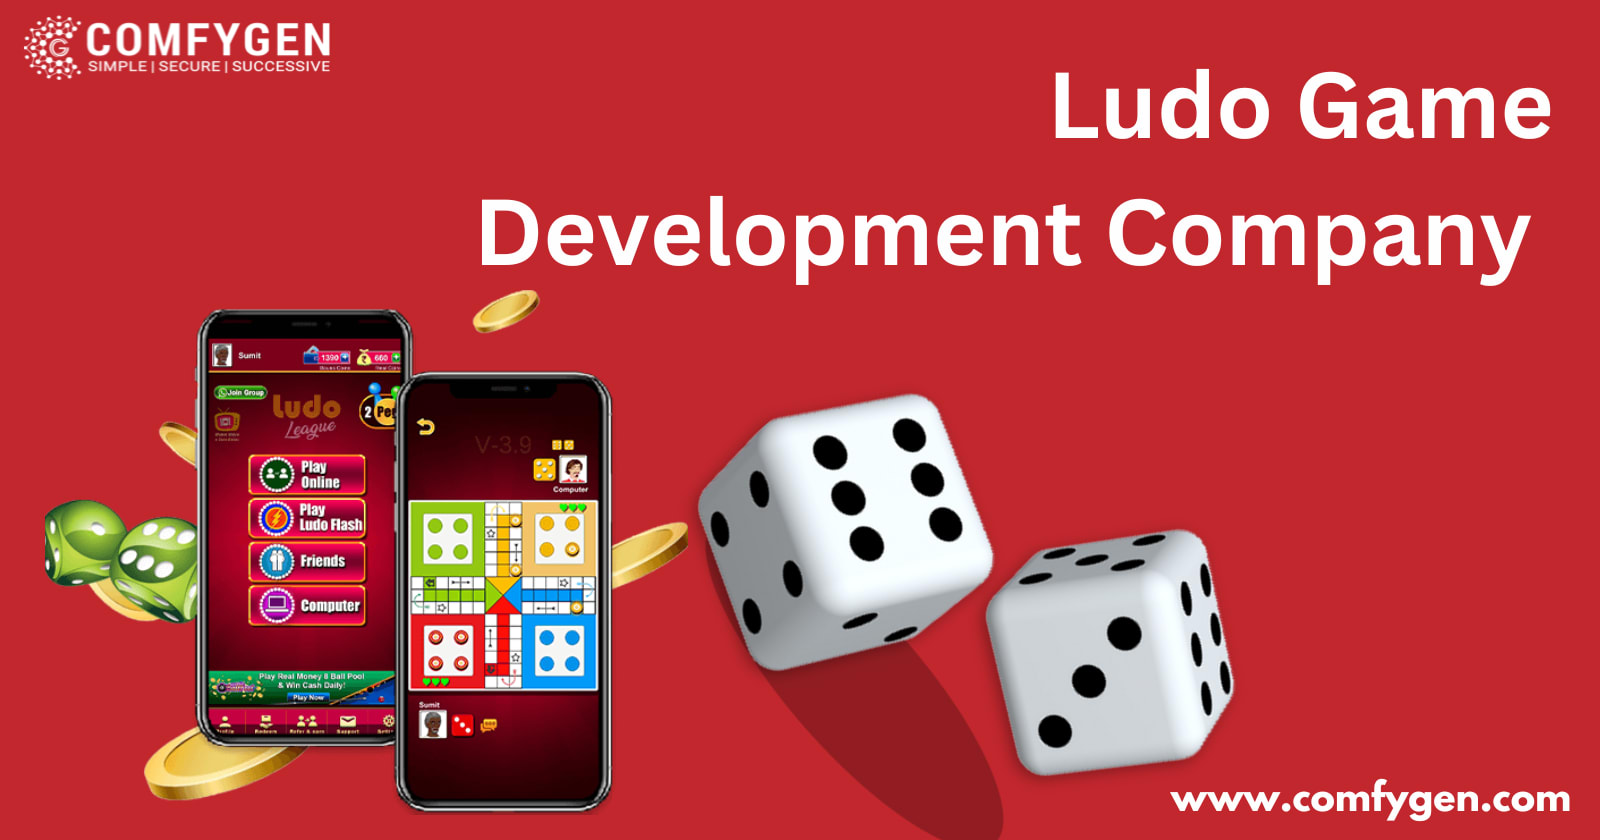 Guide for Ludo King::Appstore for Android